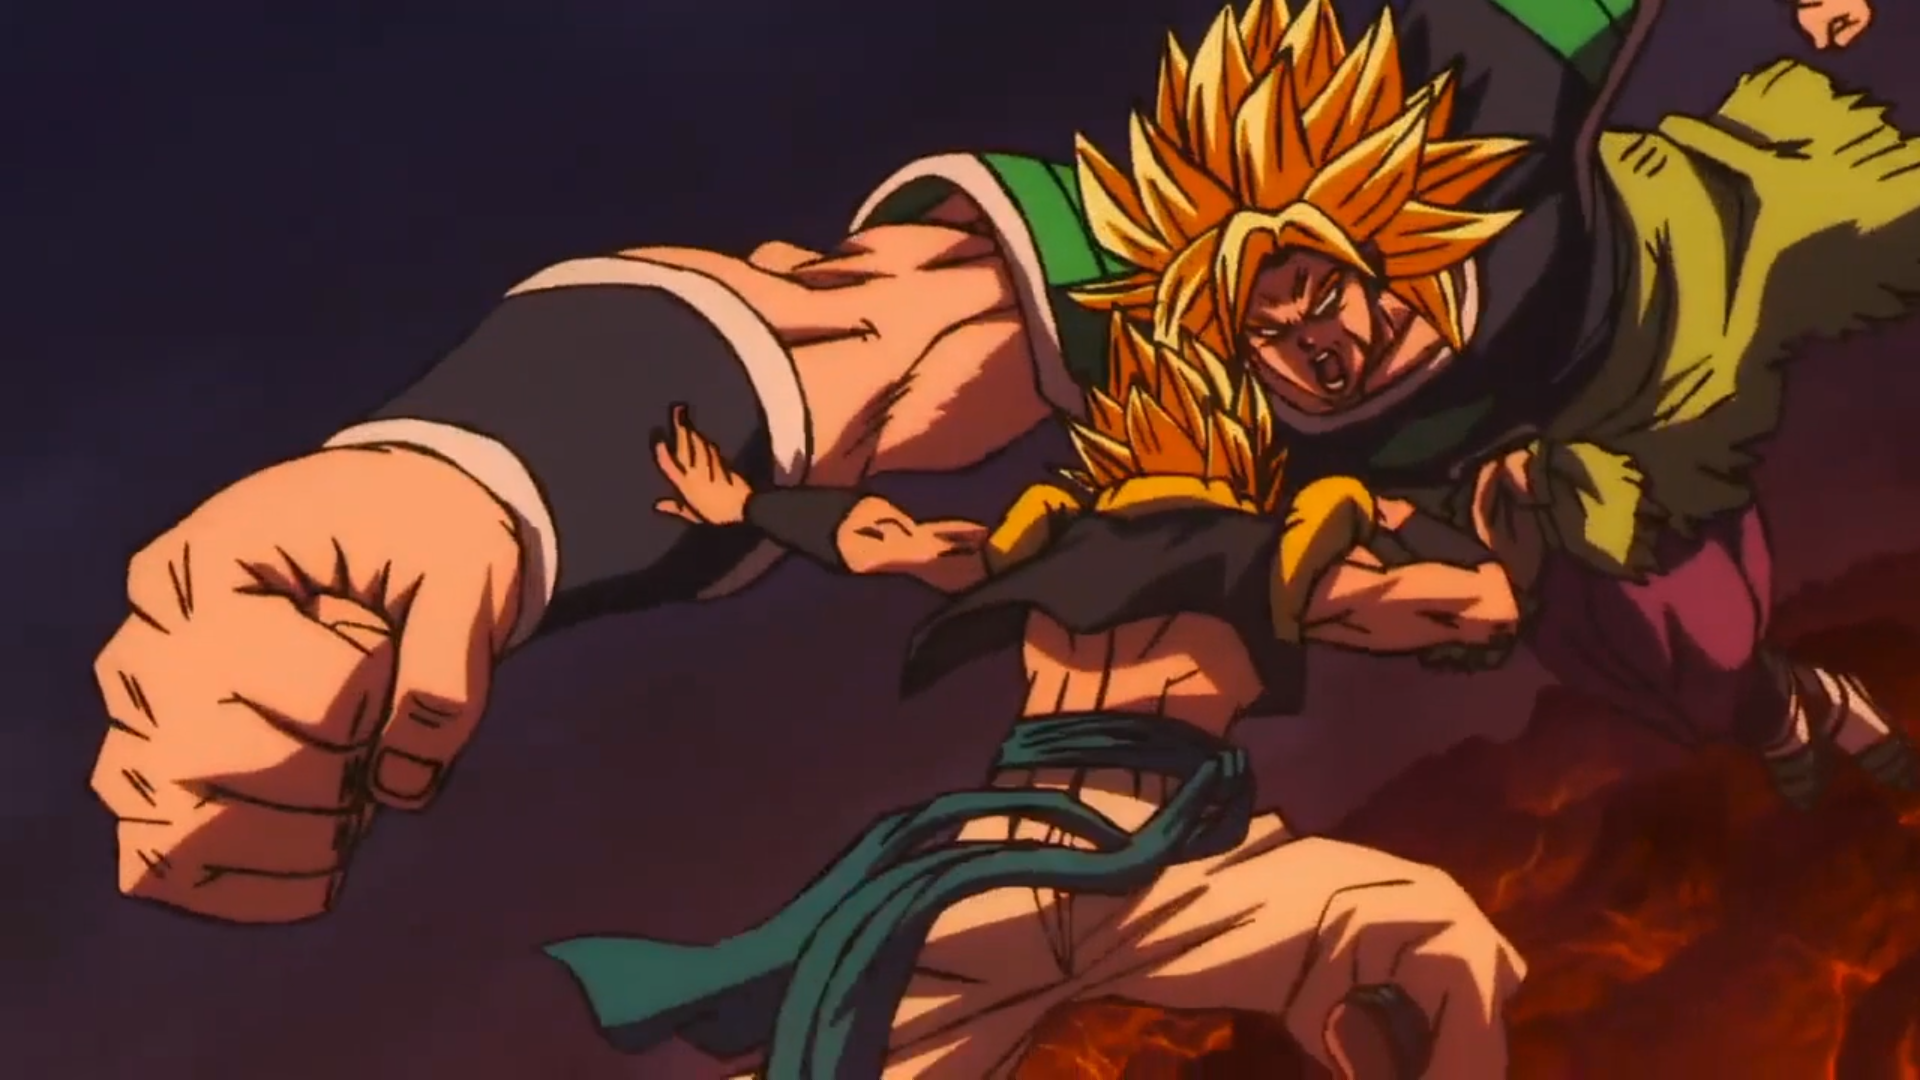 Dragon Ball Super: Super Hero Reveals Why Broly Can Never Train on Earth